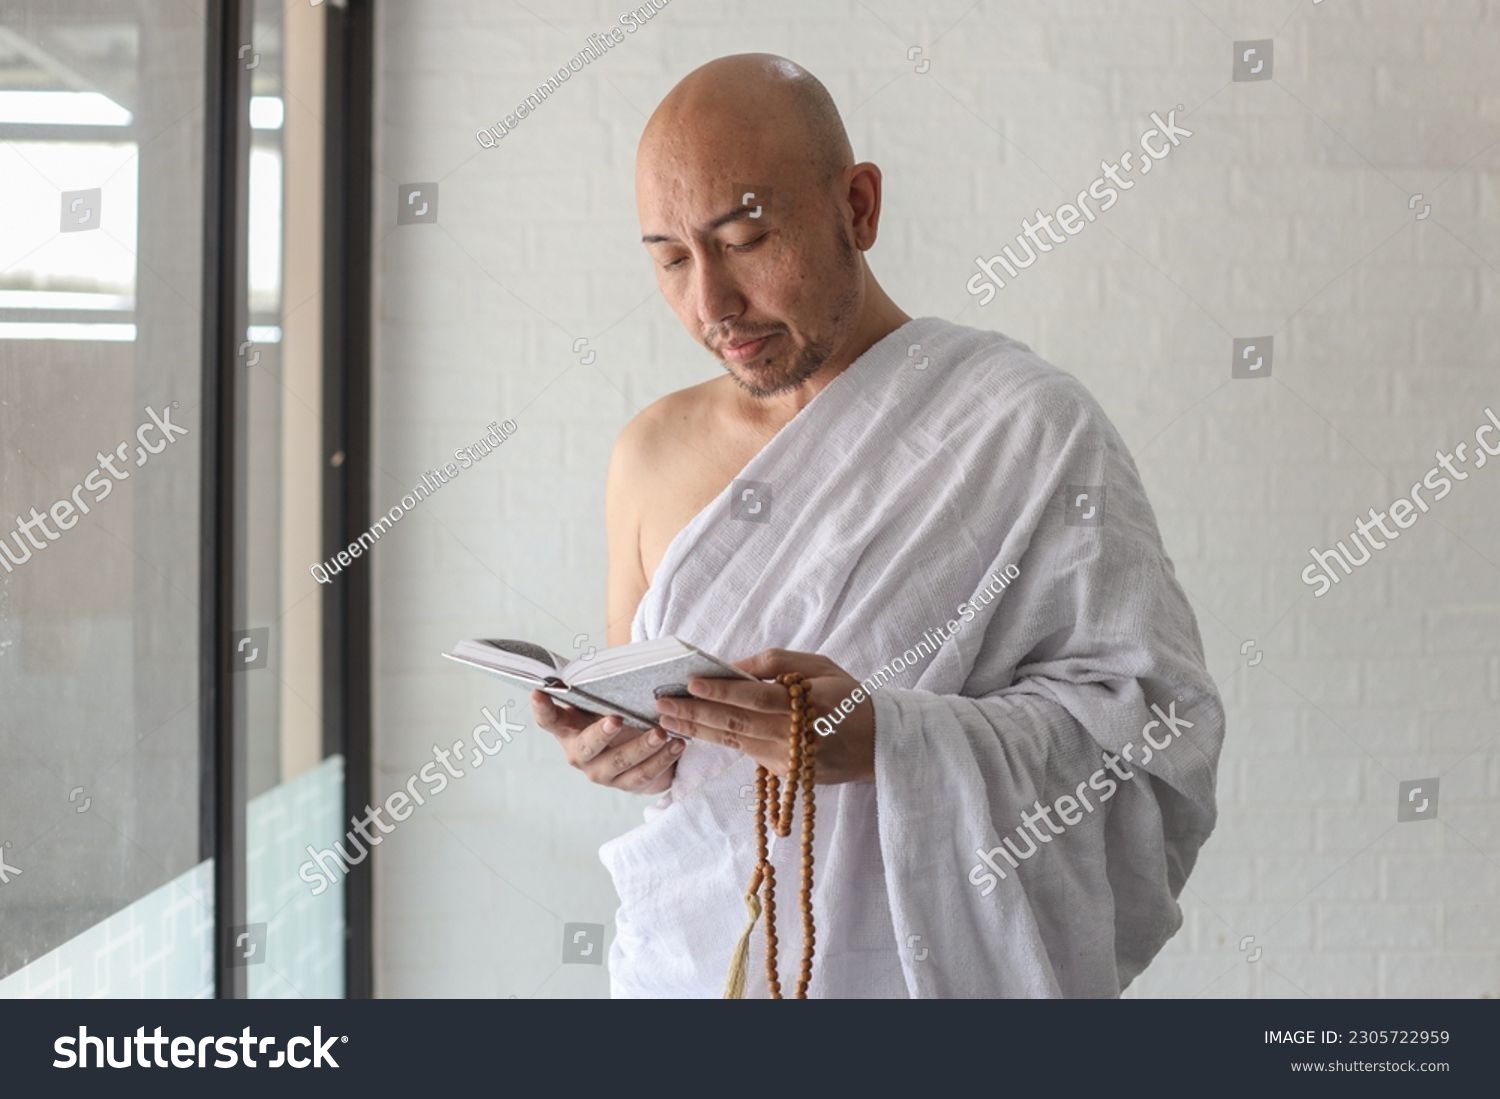 Muslim man wearing traditional white ihram clothes, reading quran while holds prayer beads.  #2305722959